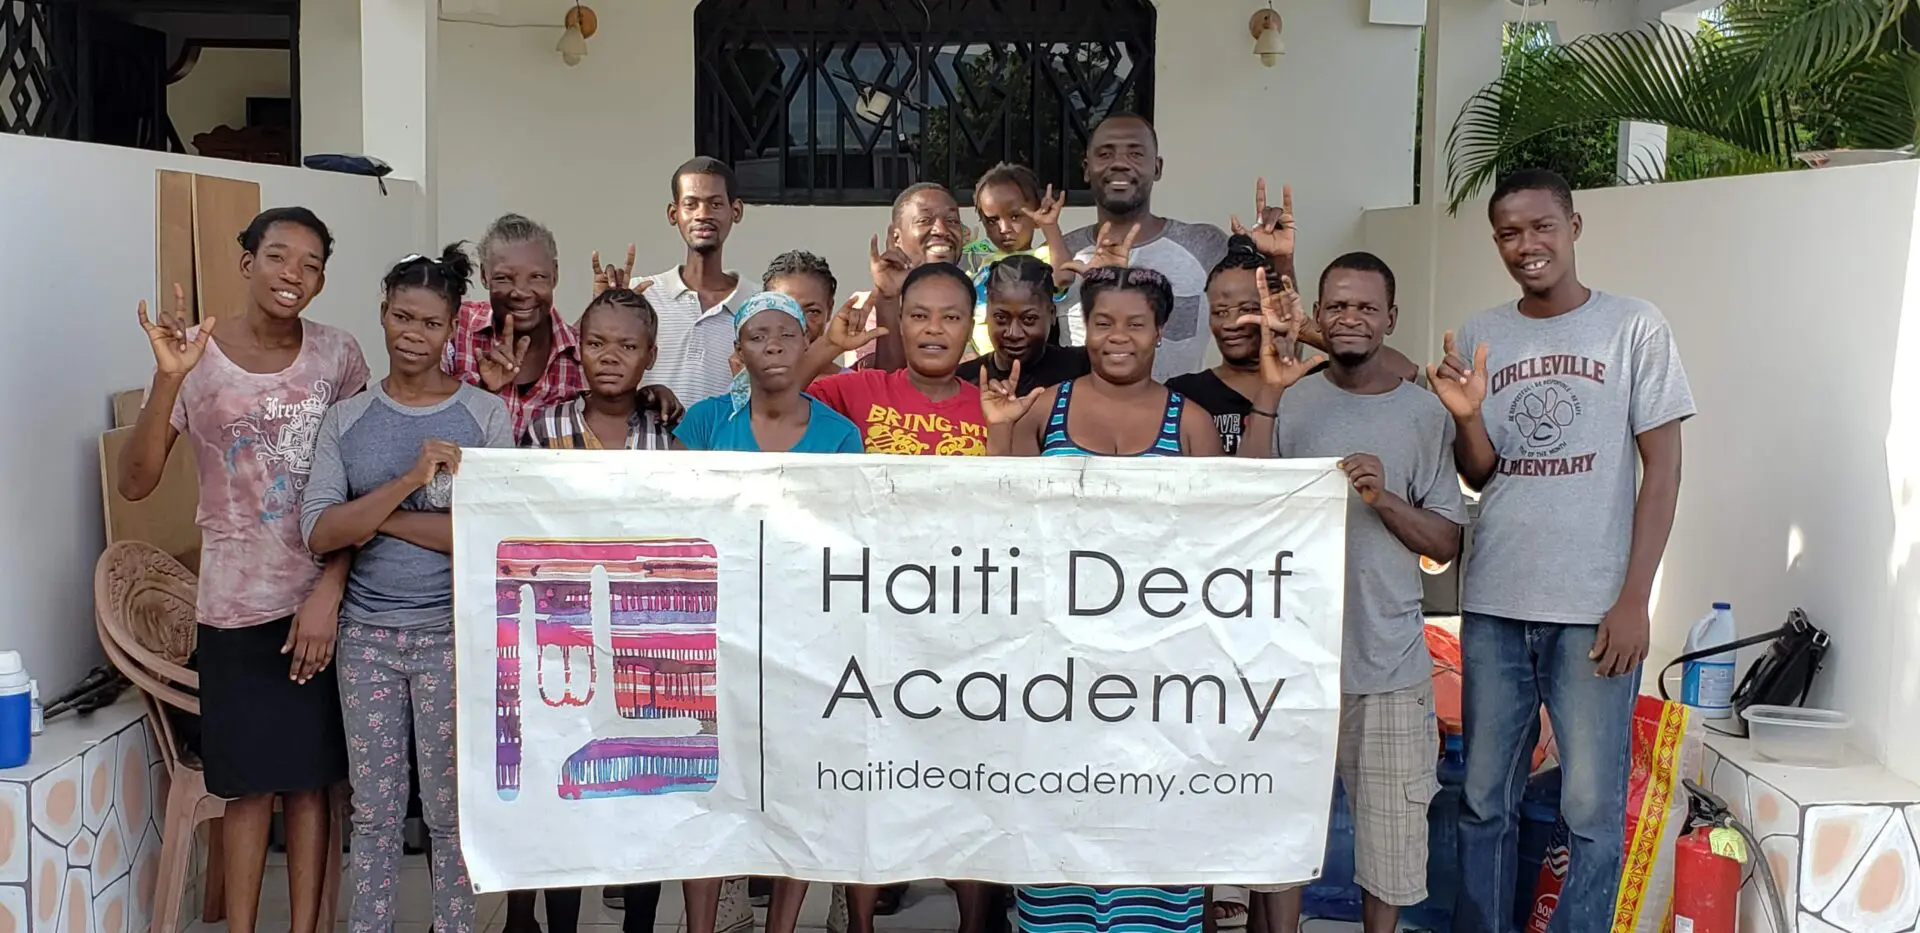 A Group of People Holding Haiti Deaf Academy Banner